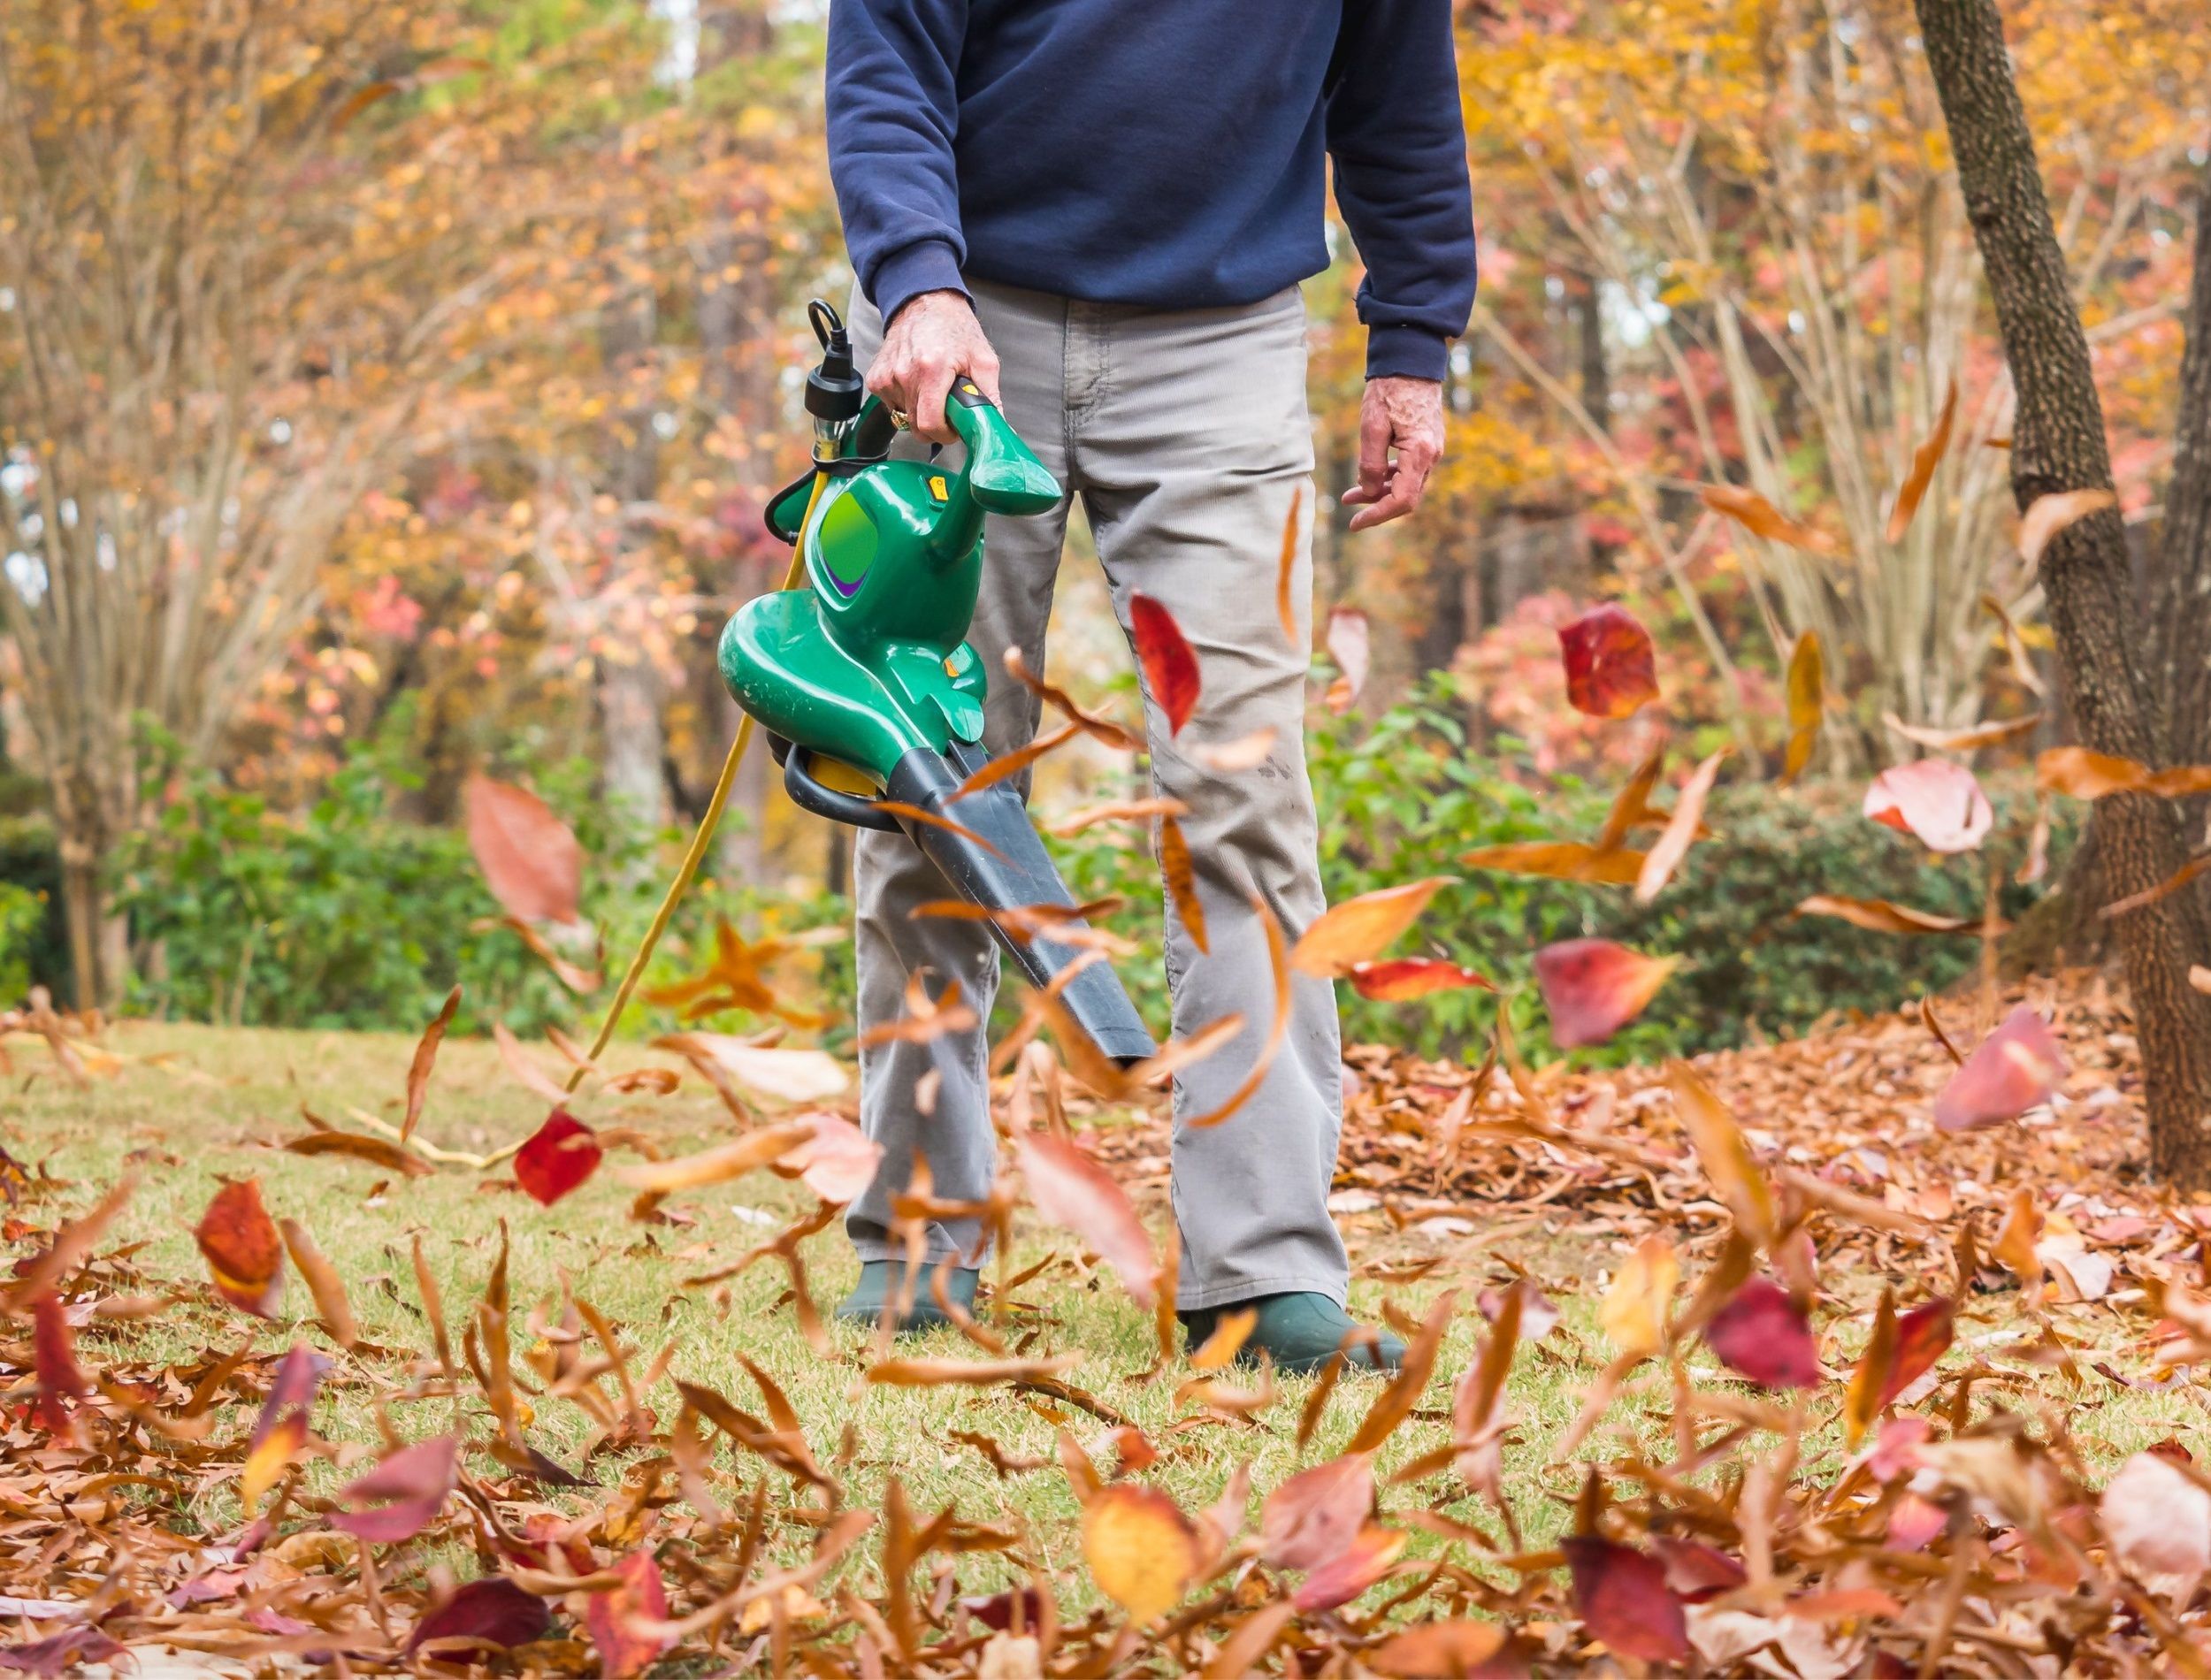 Alternatives to Gas-Powered Leaf Blowers - Dengarden